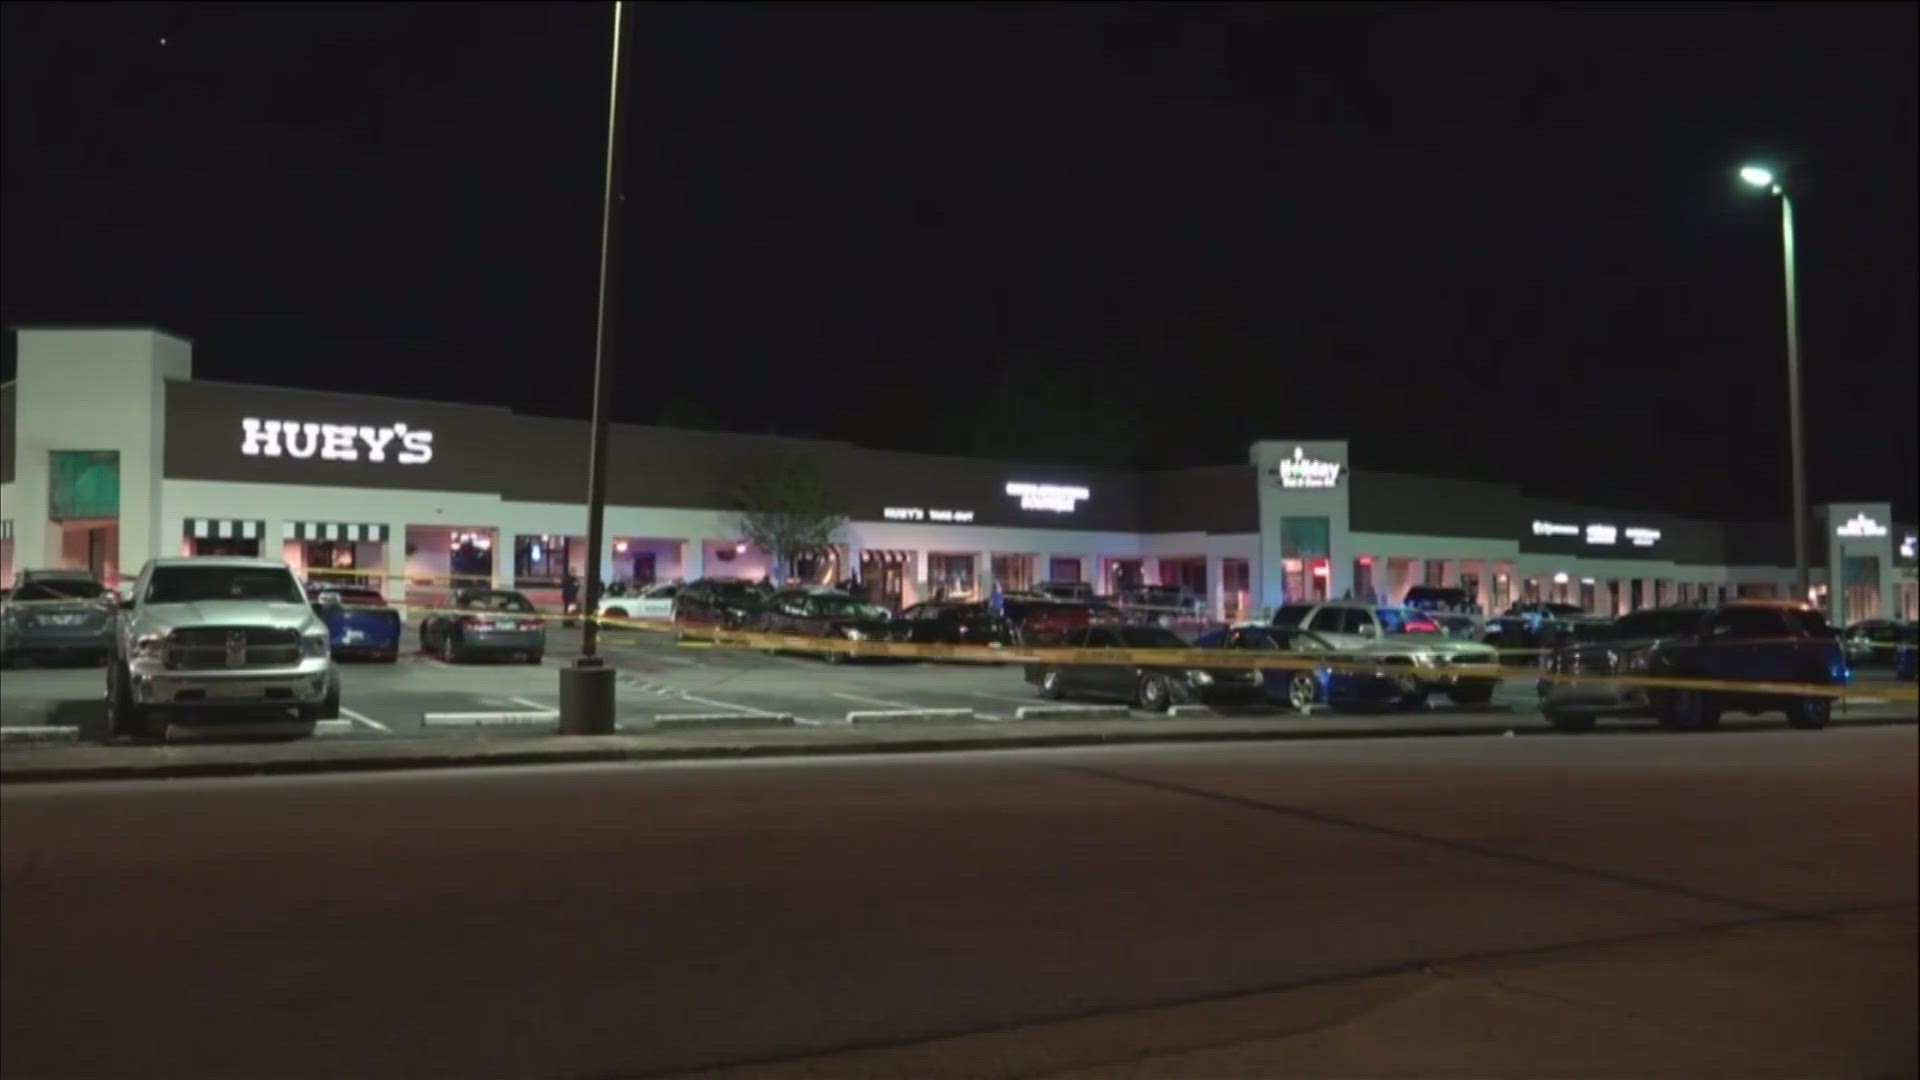 MPD said an off-duty officer saw three to four people breaking into a Dodge Charger in the parking lot of the Huey's located at 4872 Poplar Ave.